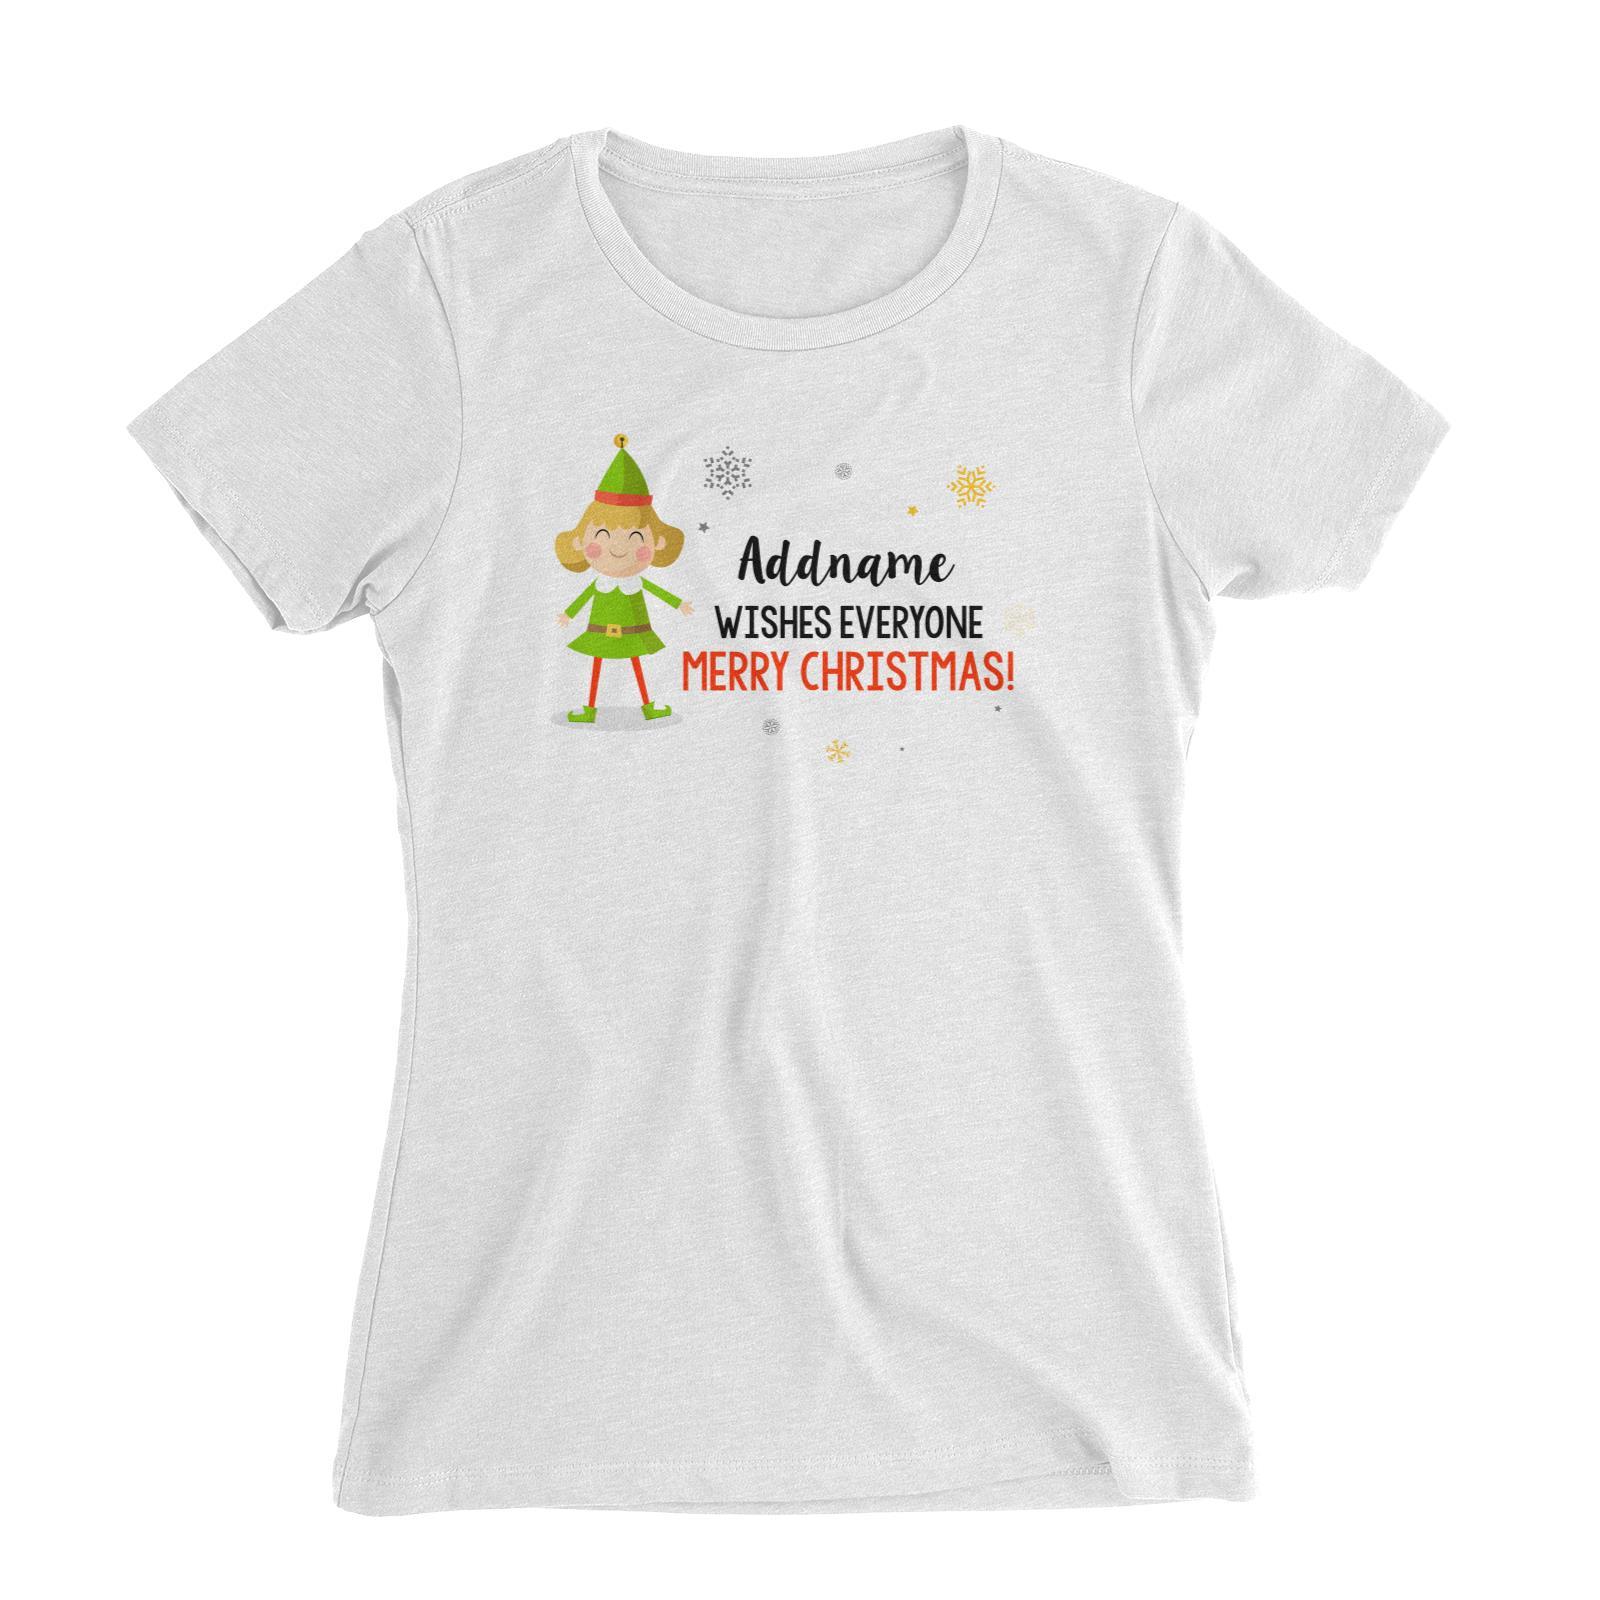 Cute Elf Woman Wishes Everyone Merry Christmas Addname Women's Slim Fit T-Shirt  Matching Family Personalizable Designs